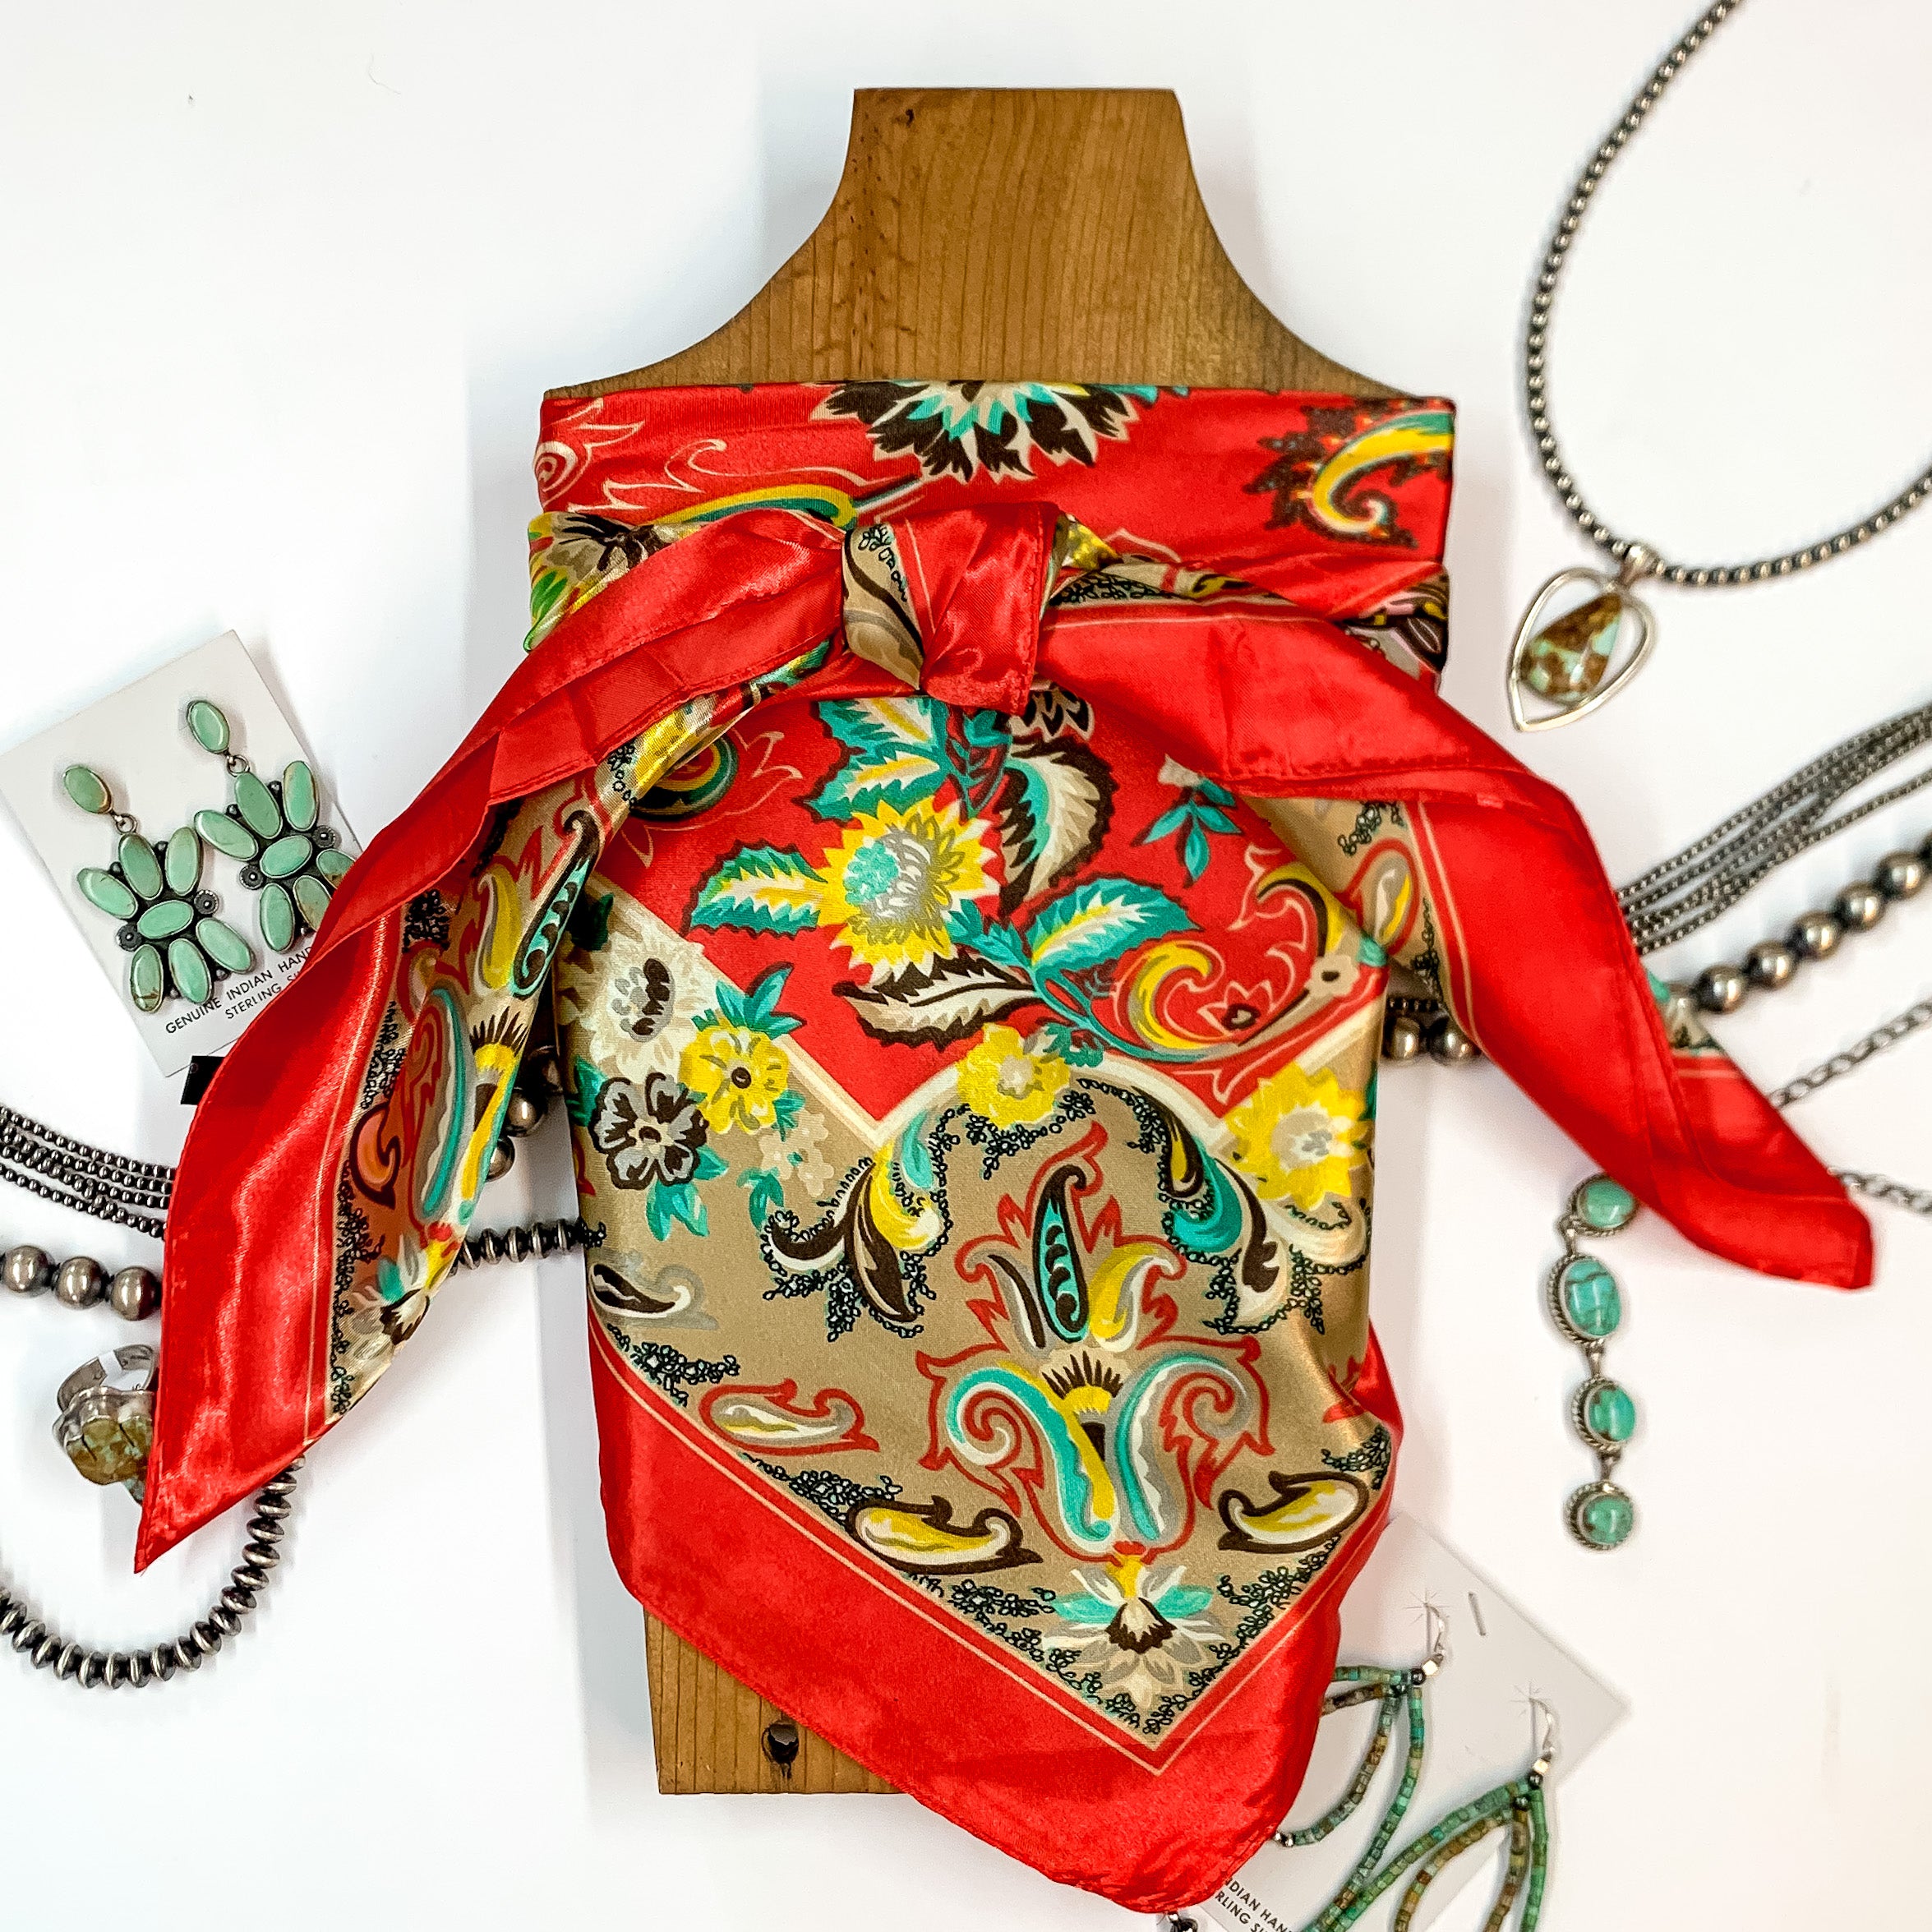 Patterned scarf in Concho River. Scarf is tied around a wooden piece. The scarf and piece of wood is pictured on a white background with Navajo jewelry spread out around it.